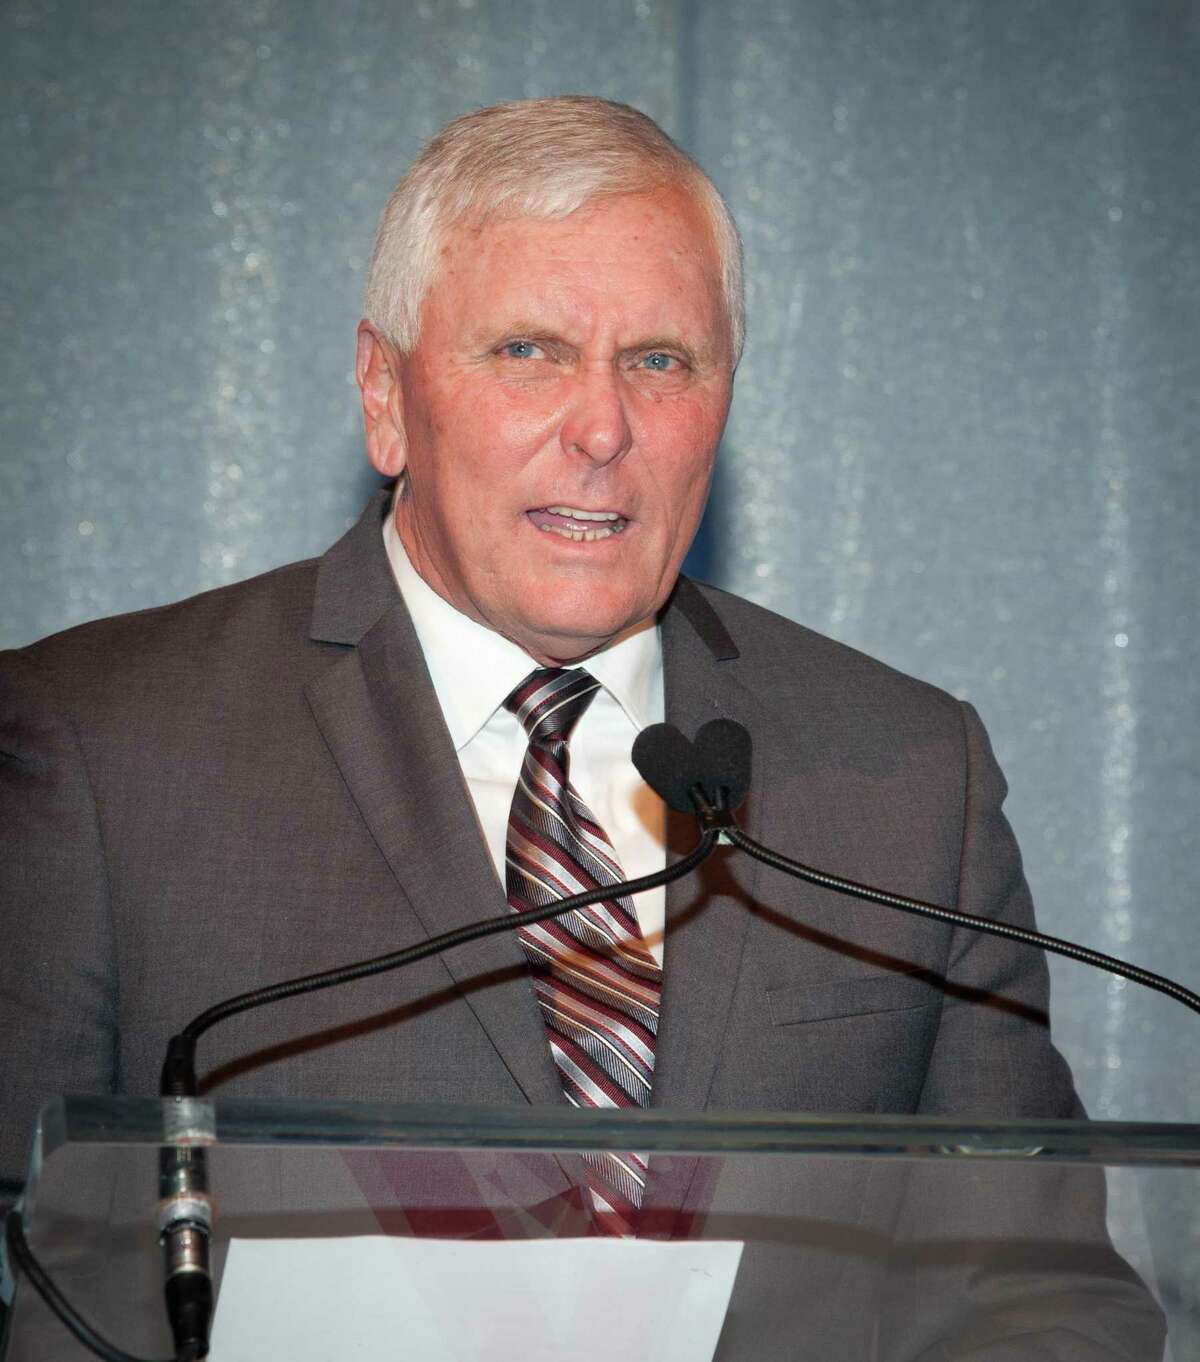 Bob Hurley, father of UConn basketbalk coach Dan Hurely. (Photo by Dave Kotinsky/Getty Images)